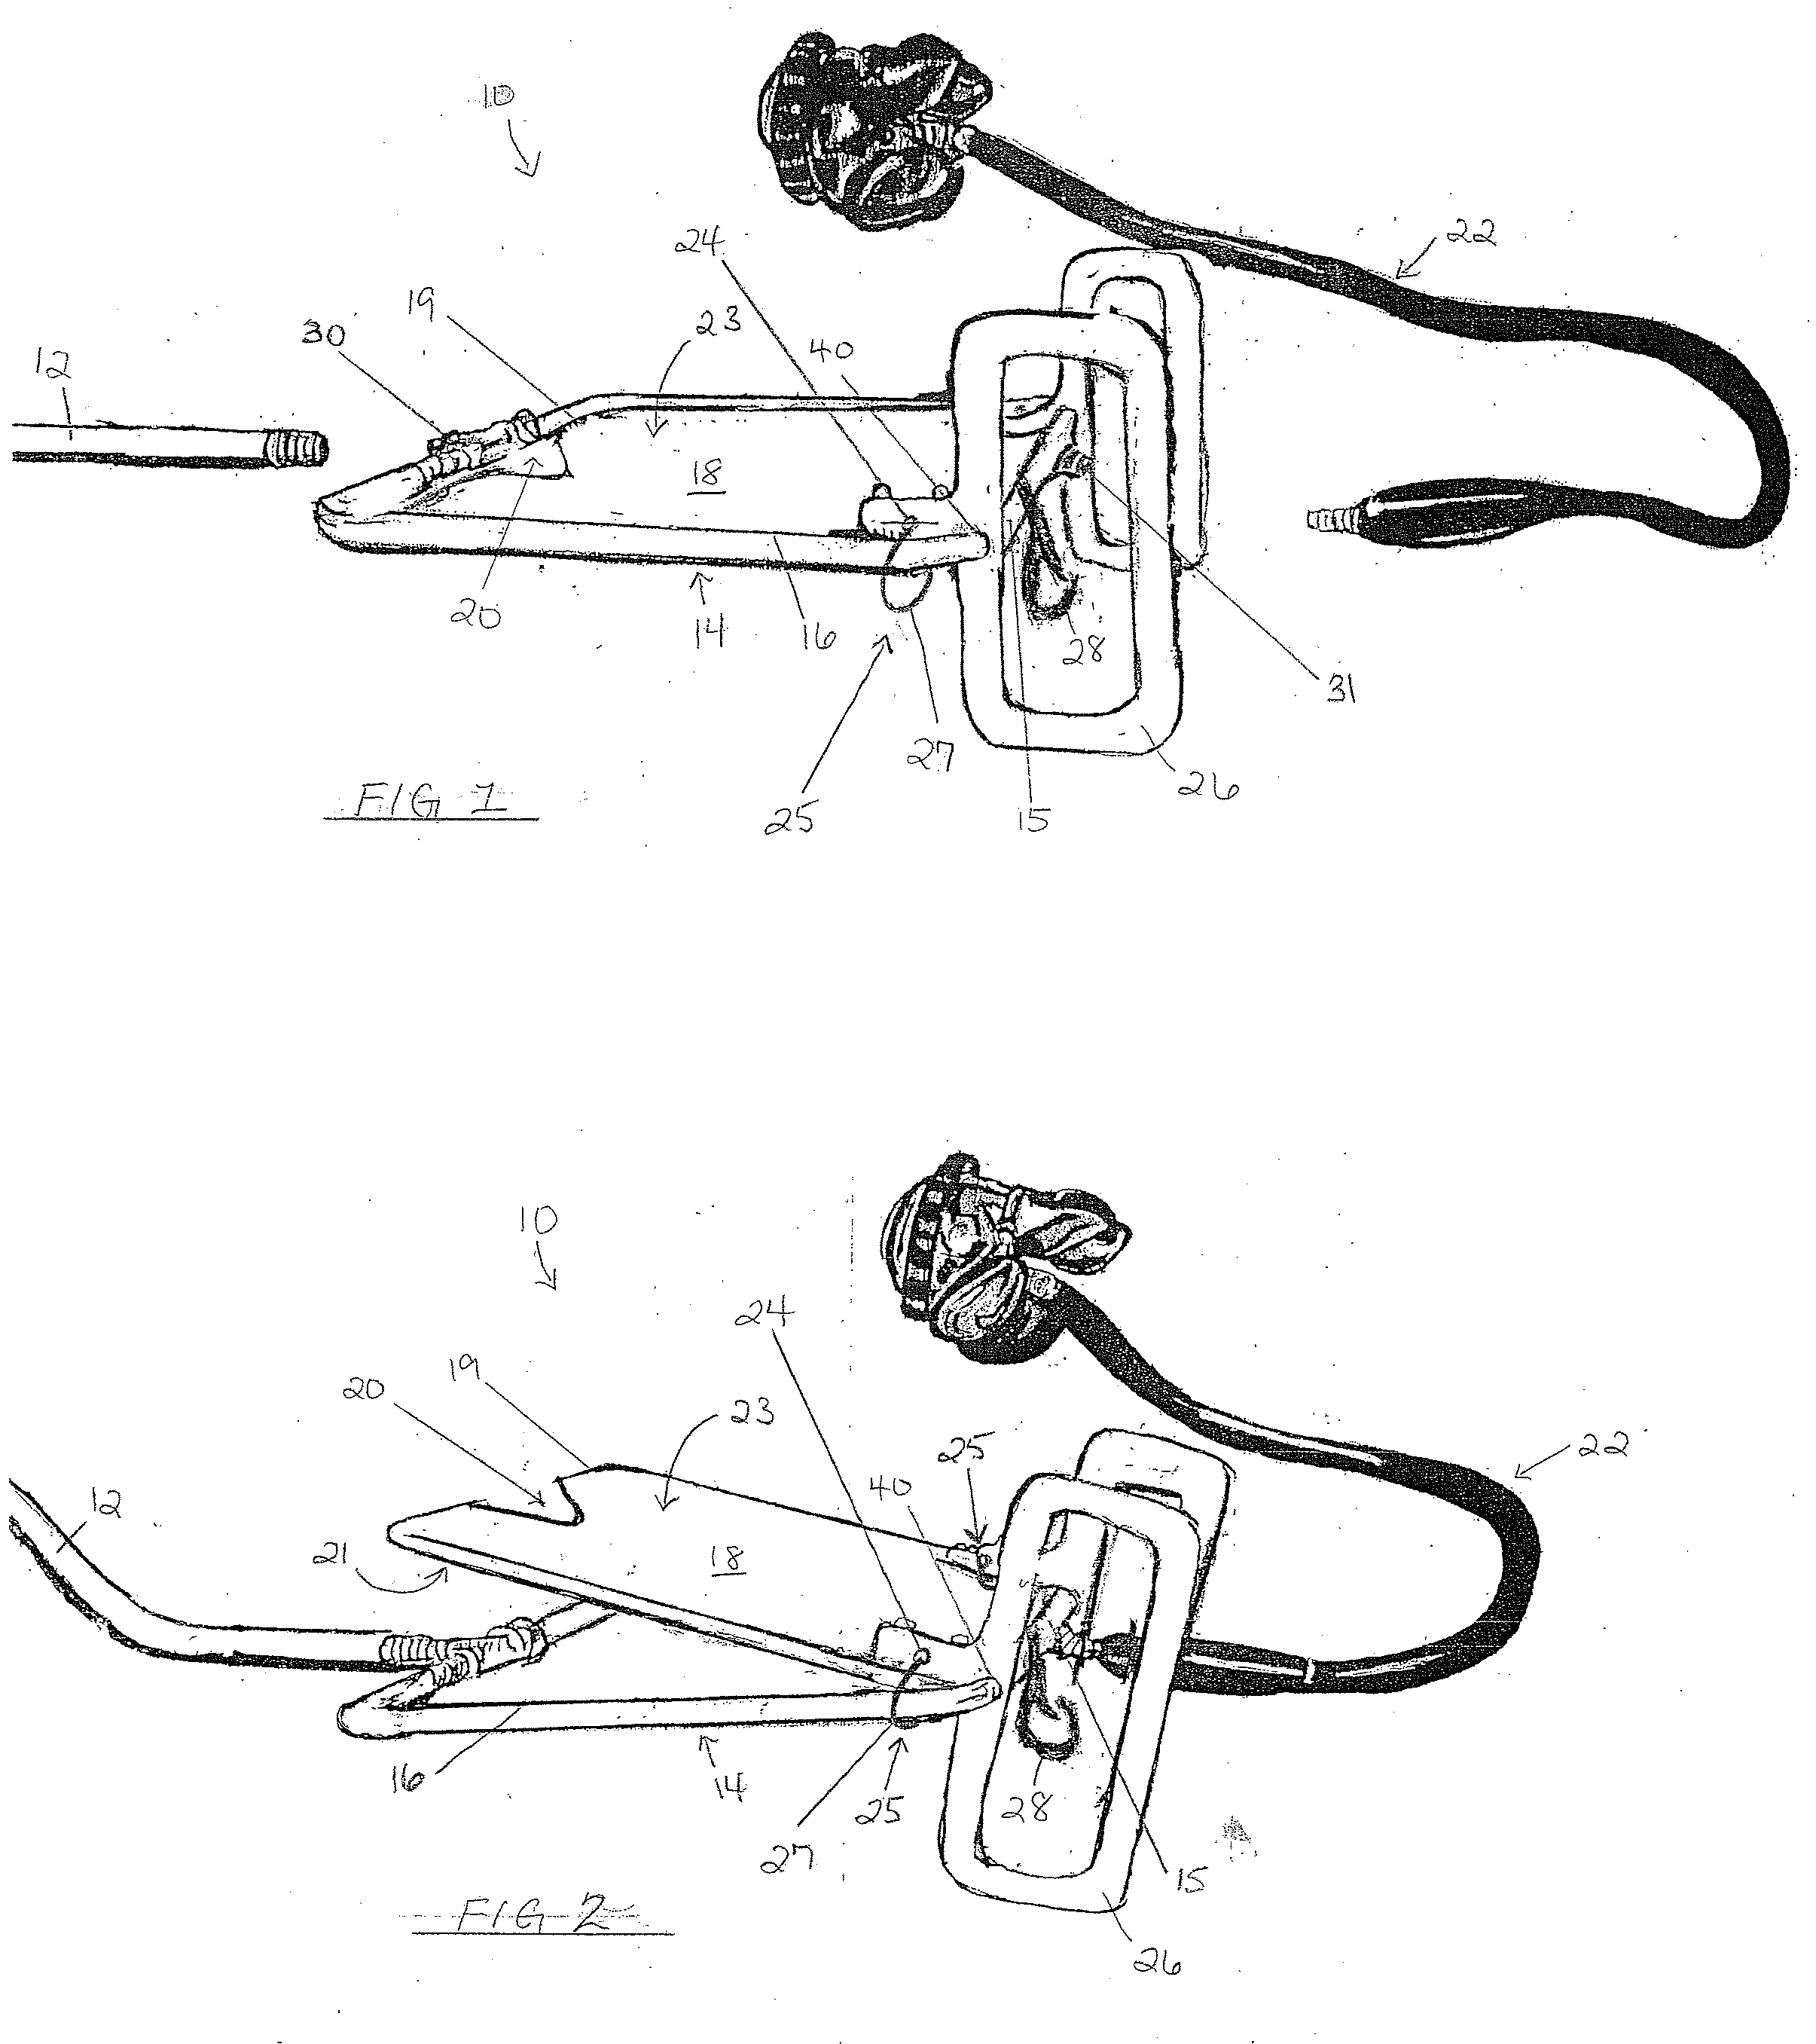 Underwater recreation apparatus and method therefor